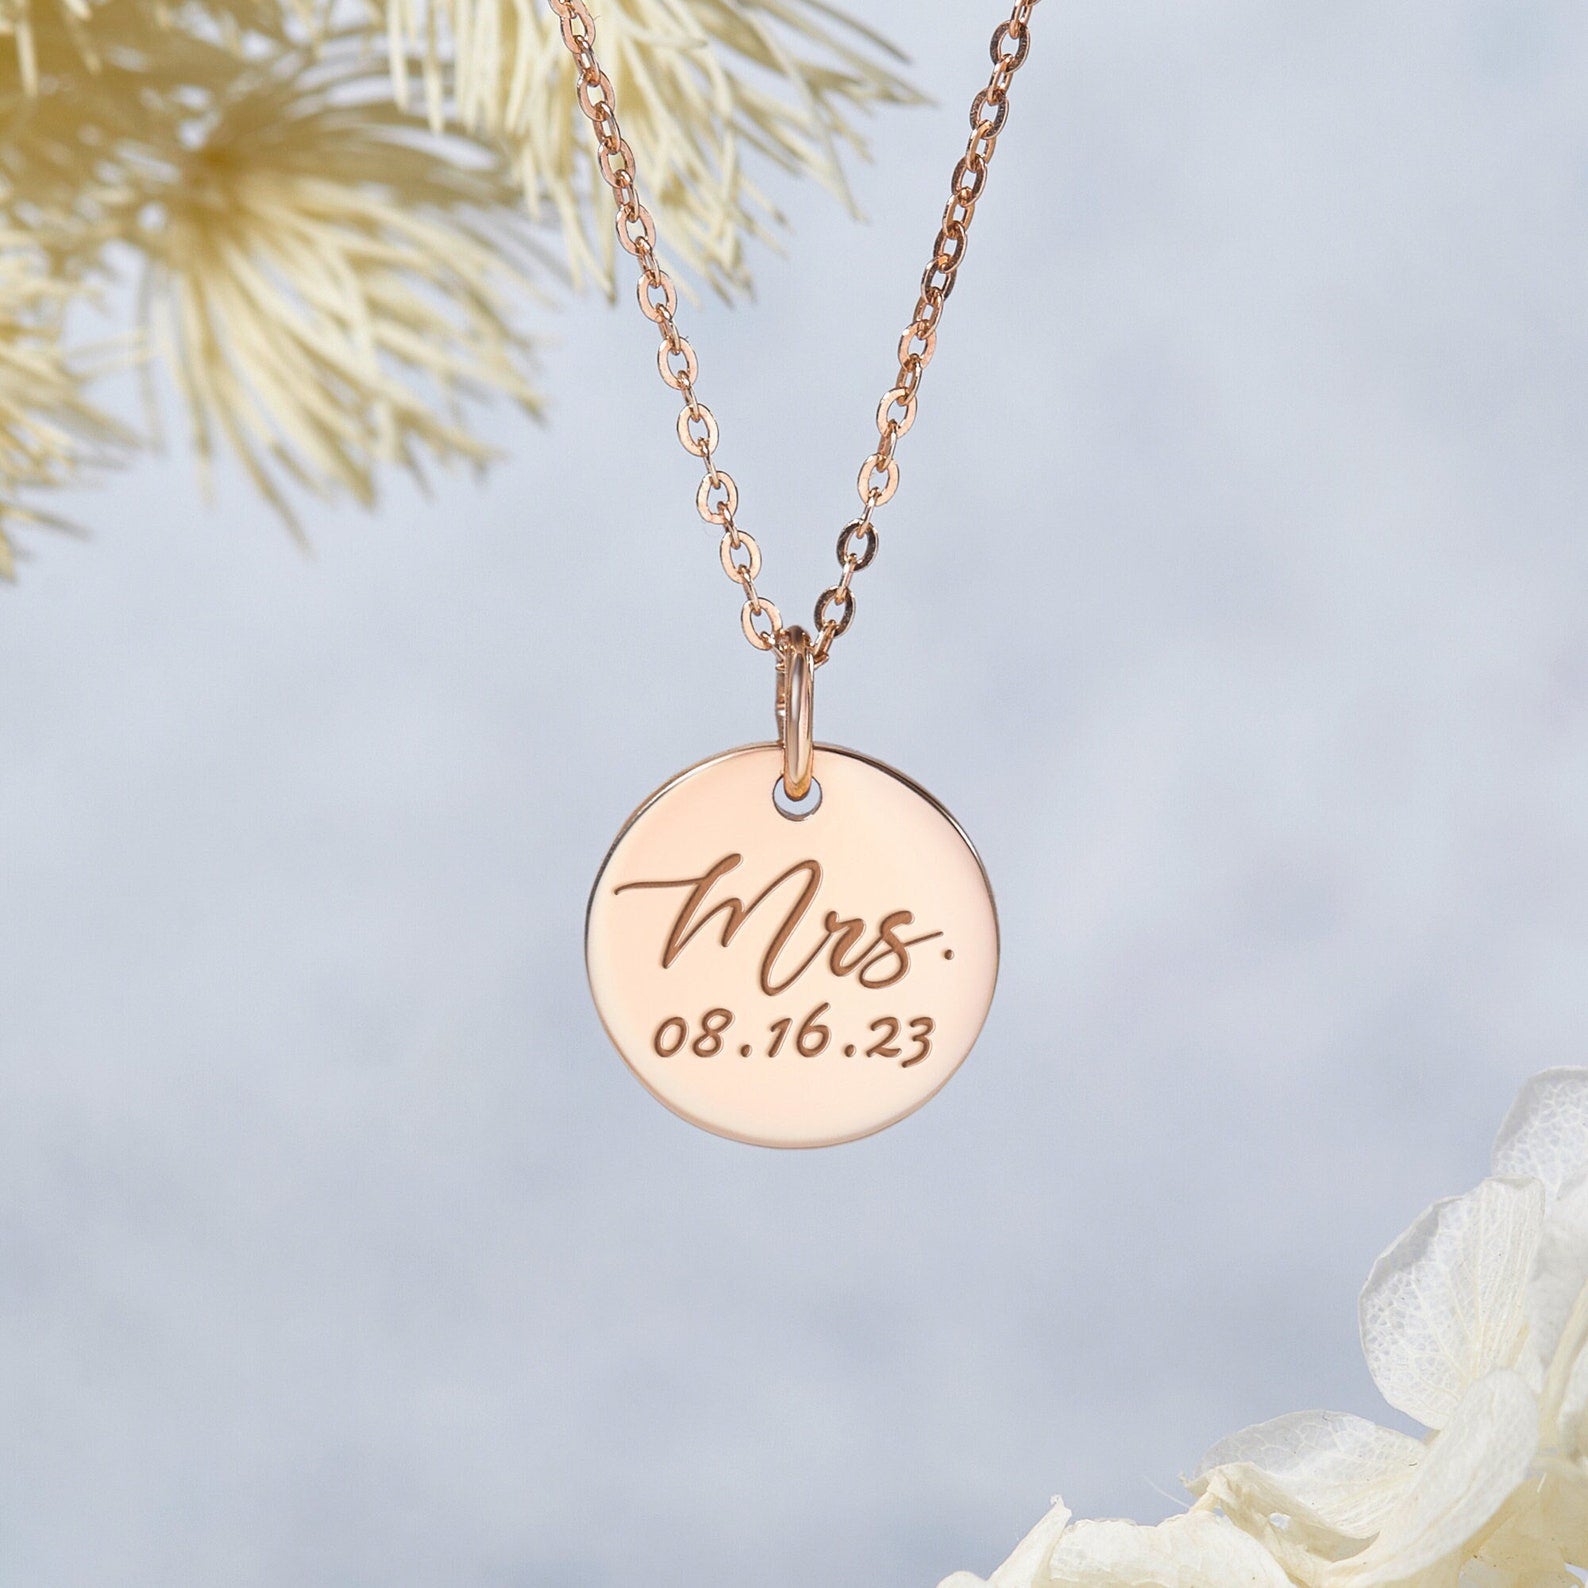 Personalized Mrs. Necklace with Wedding Date & Initials | Hypoallergenic Sterling Silver | Free Worldwide Shipping - Necklaces - Bijou Her -  -  - 